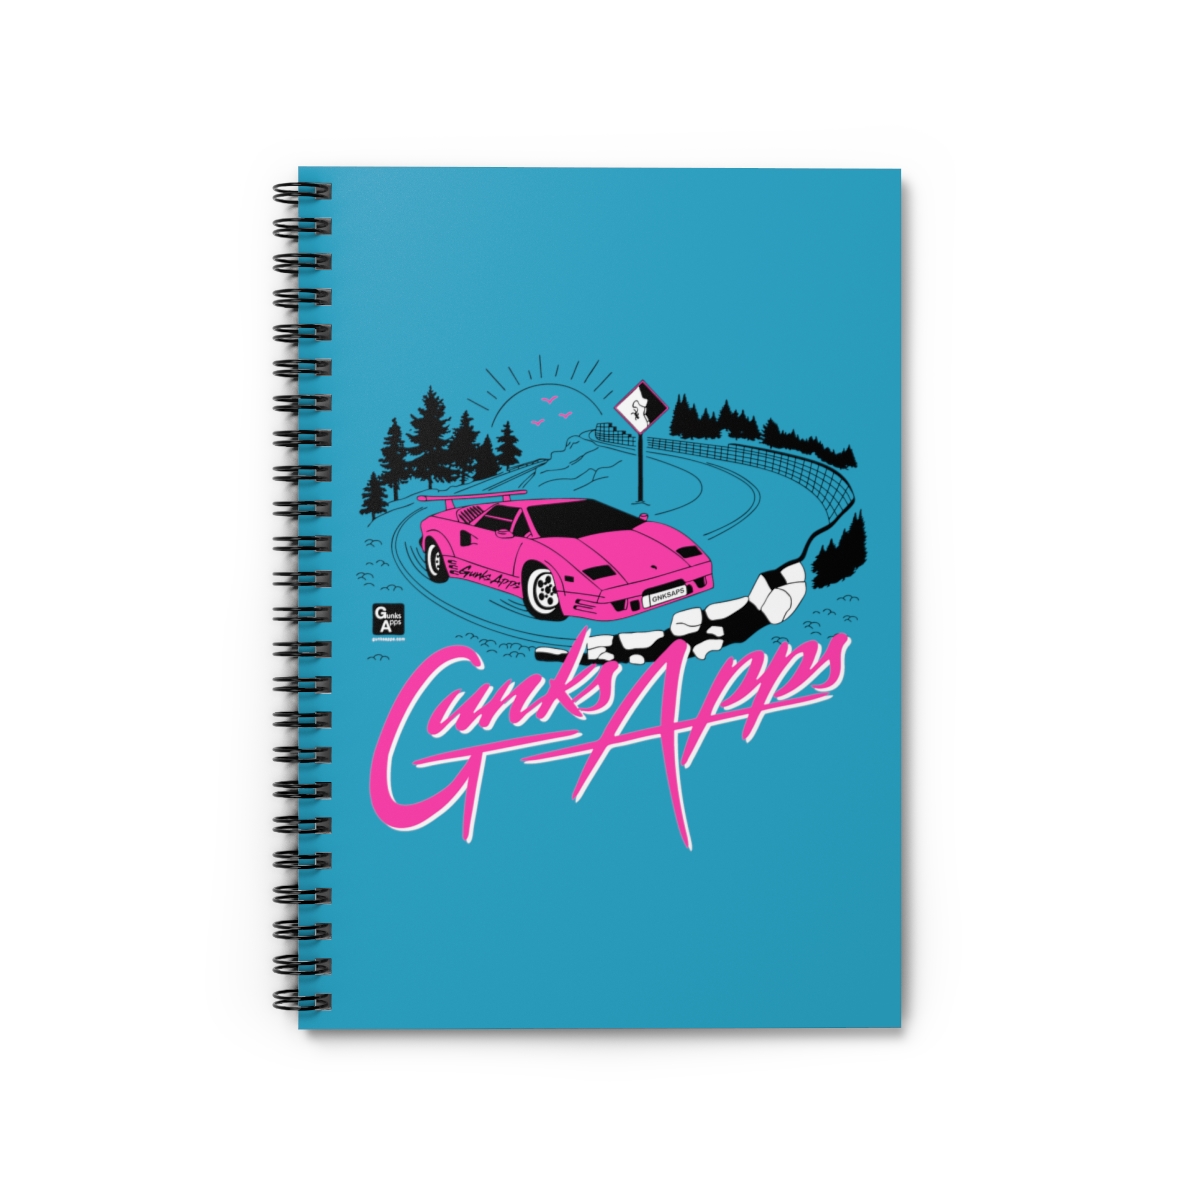 Gunks Apps Spiral Notebook - Ruled Line product thumbnail image